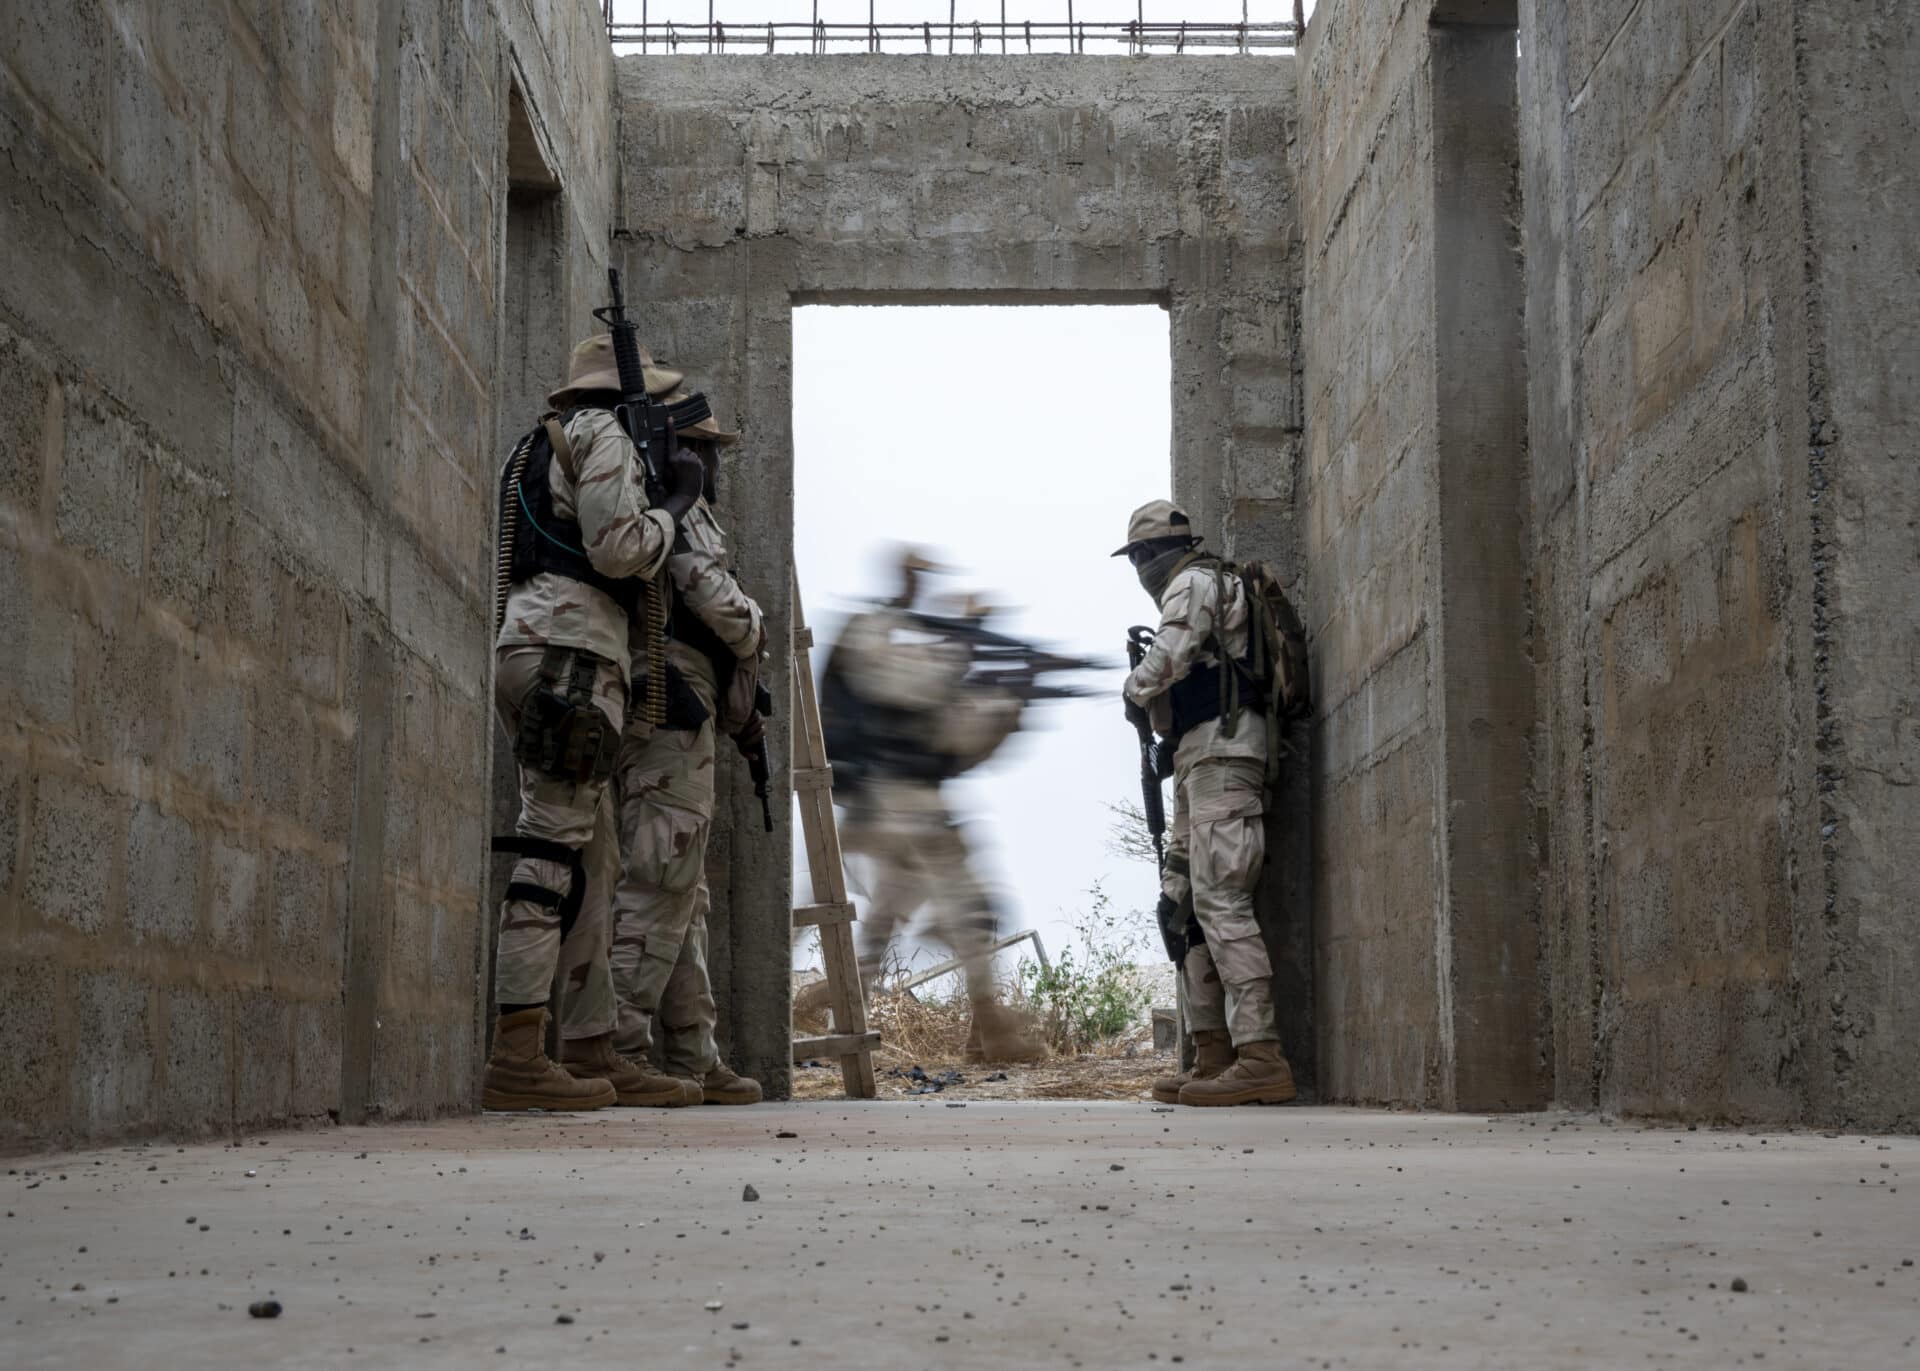 US Special Operation Forces maneuver in a building